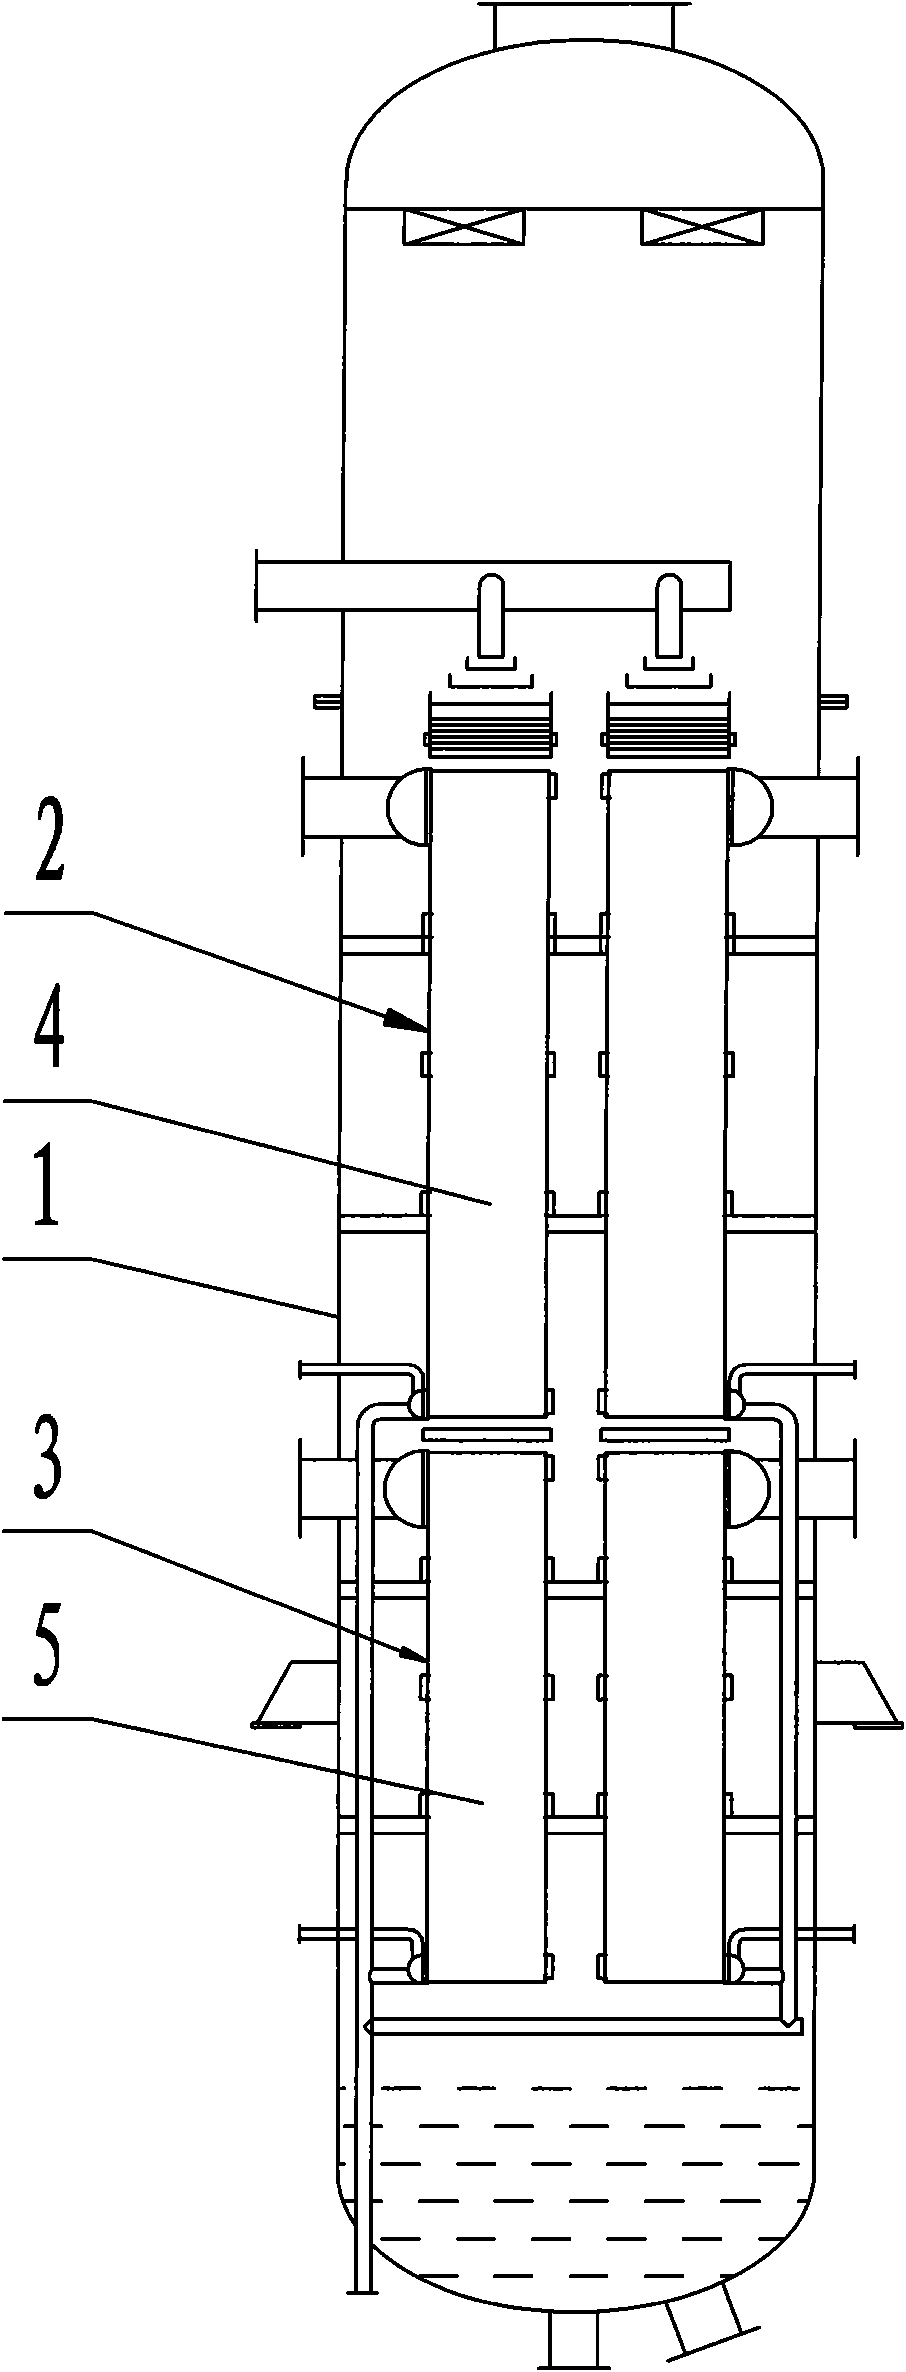 Heater structure in plate-type falling film evaporator